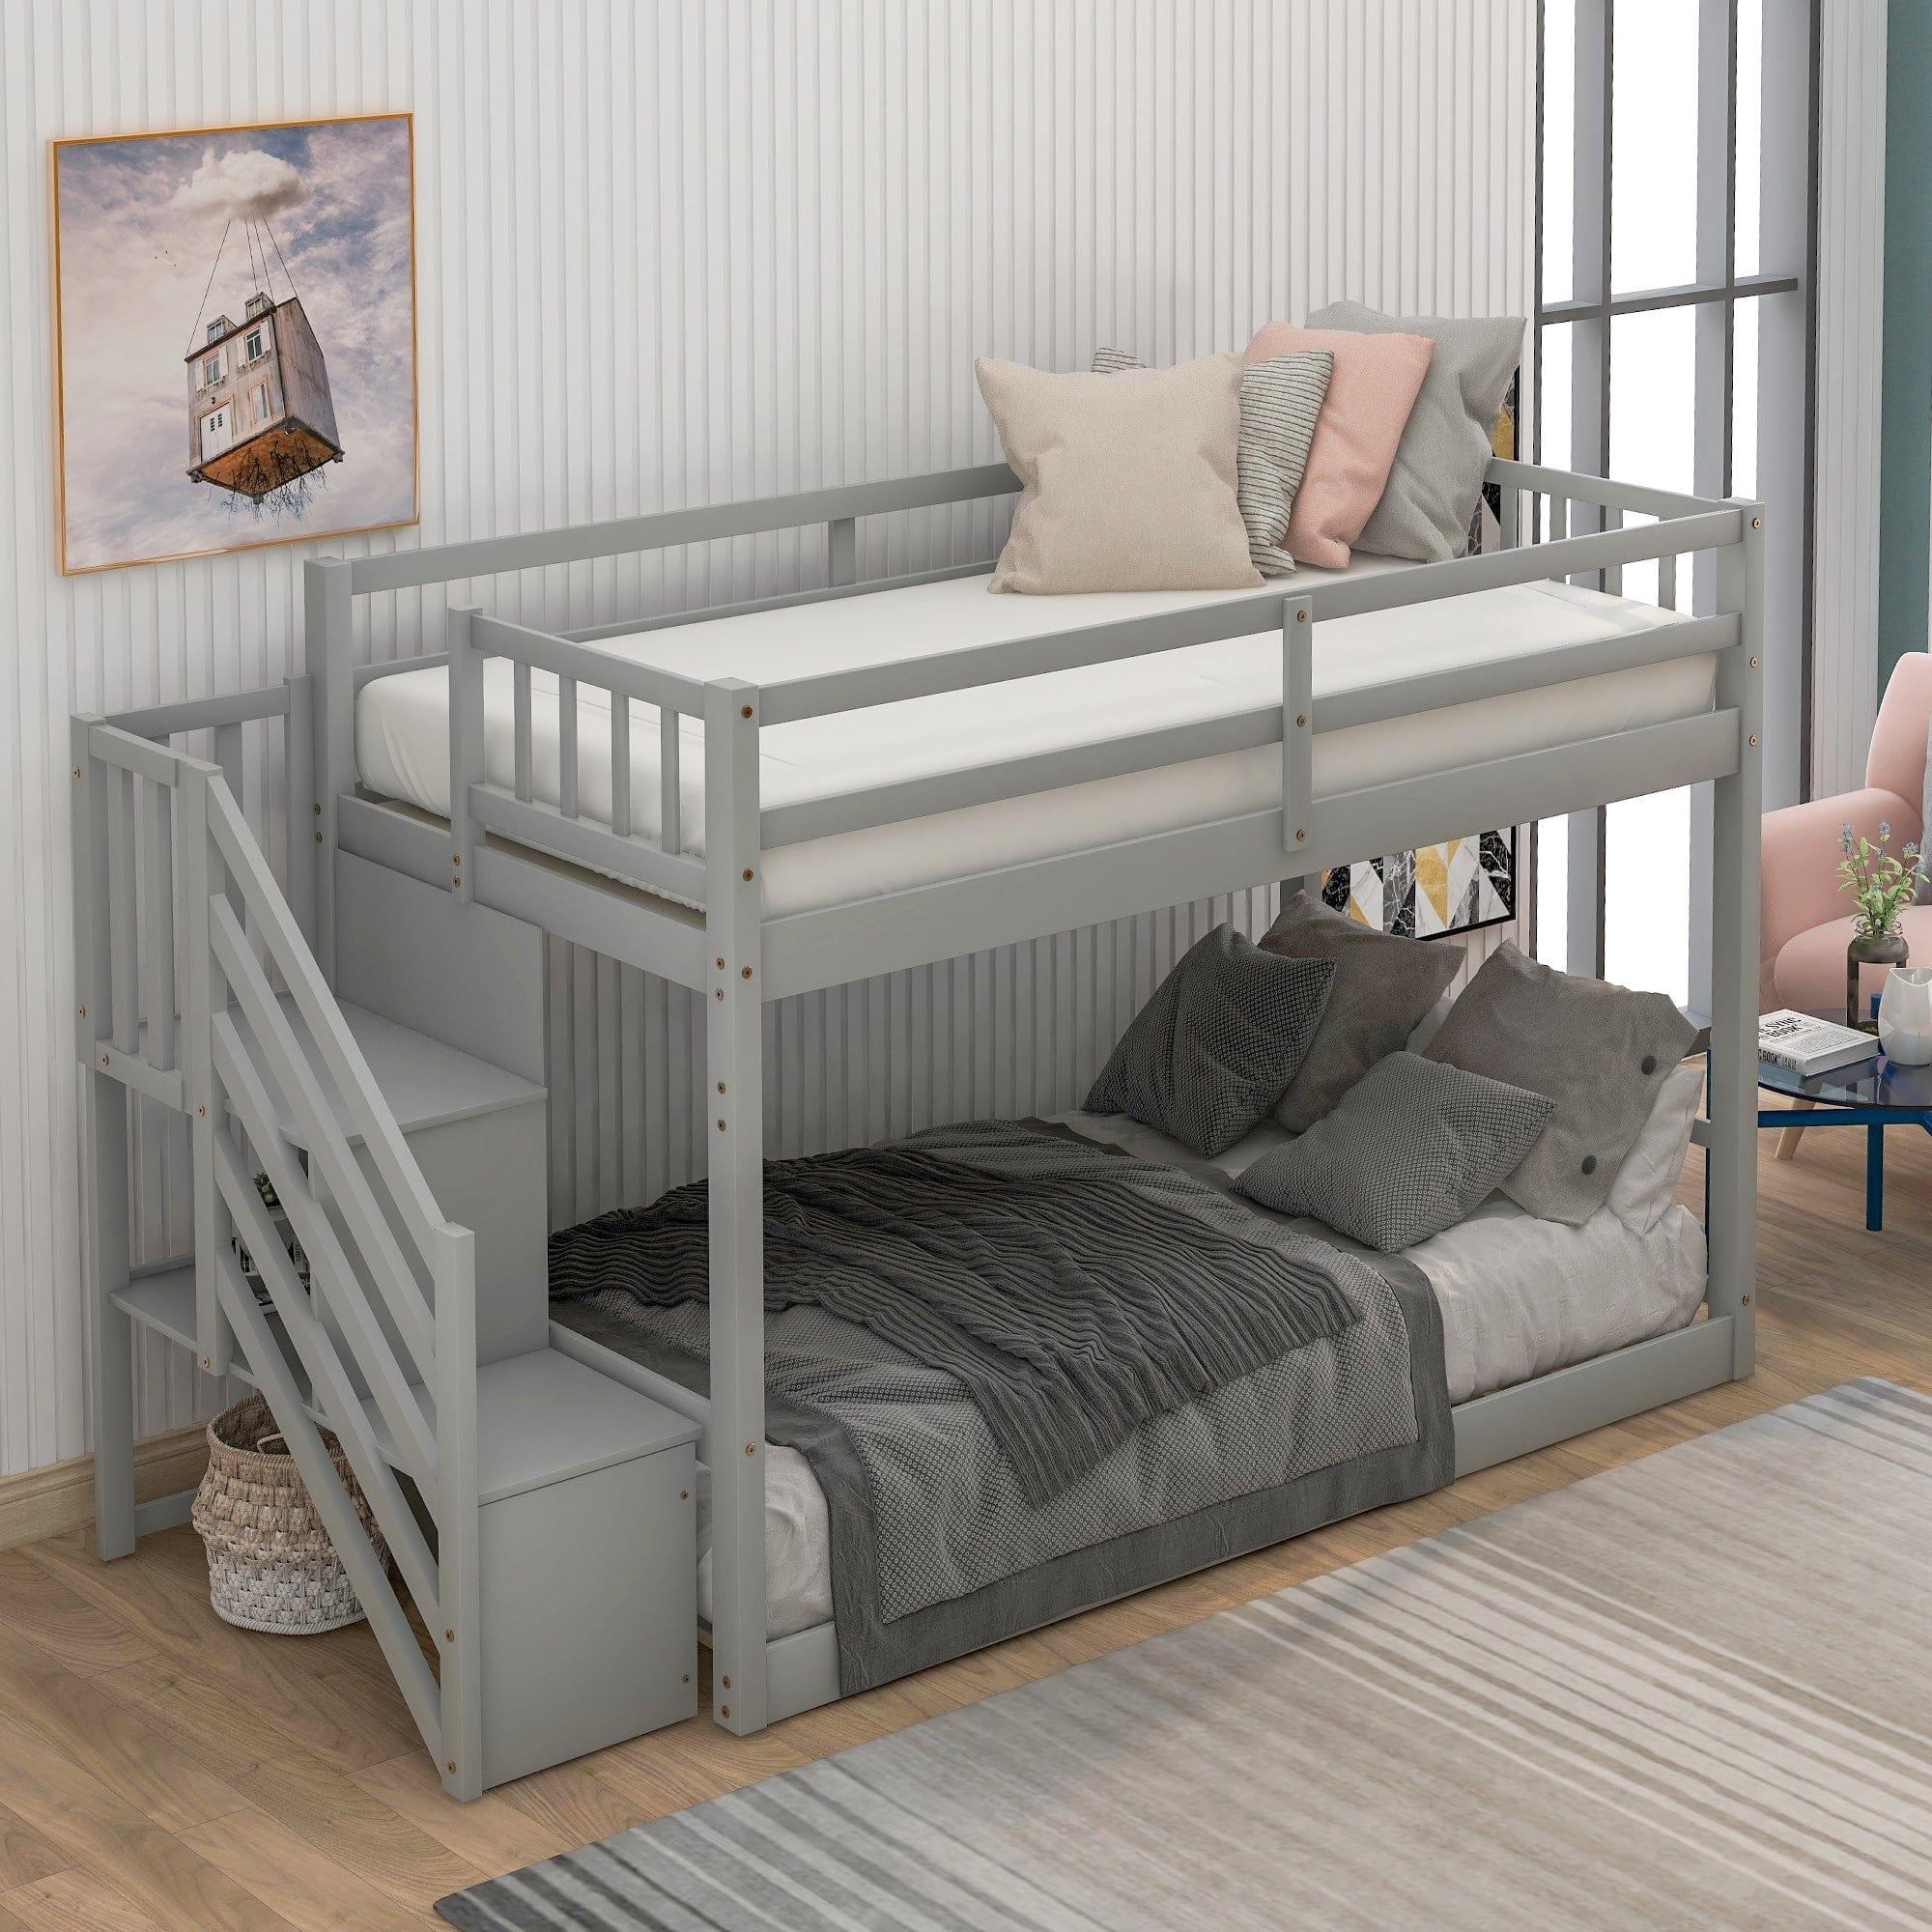 Shop Twin over Twin Floor Bunk Bed, Ladder with Storage, Gray Mademoiselle Home Decor